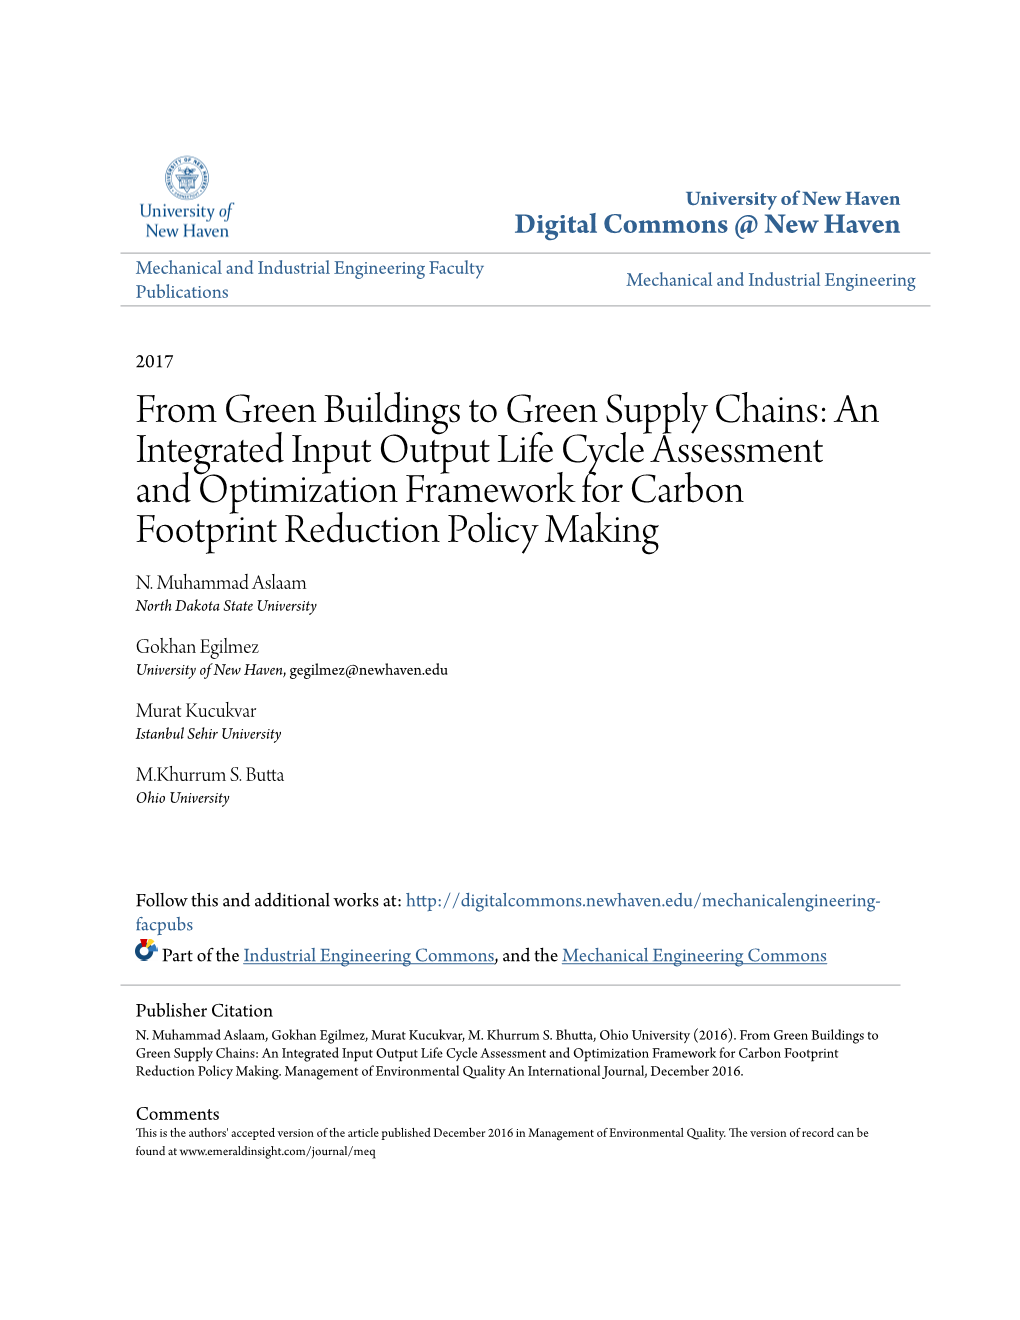 An Integrated Input Output Life Cycle Assessment and Optimization Framework for Carbon Footprint Reduction Policy Making N